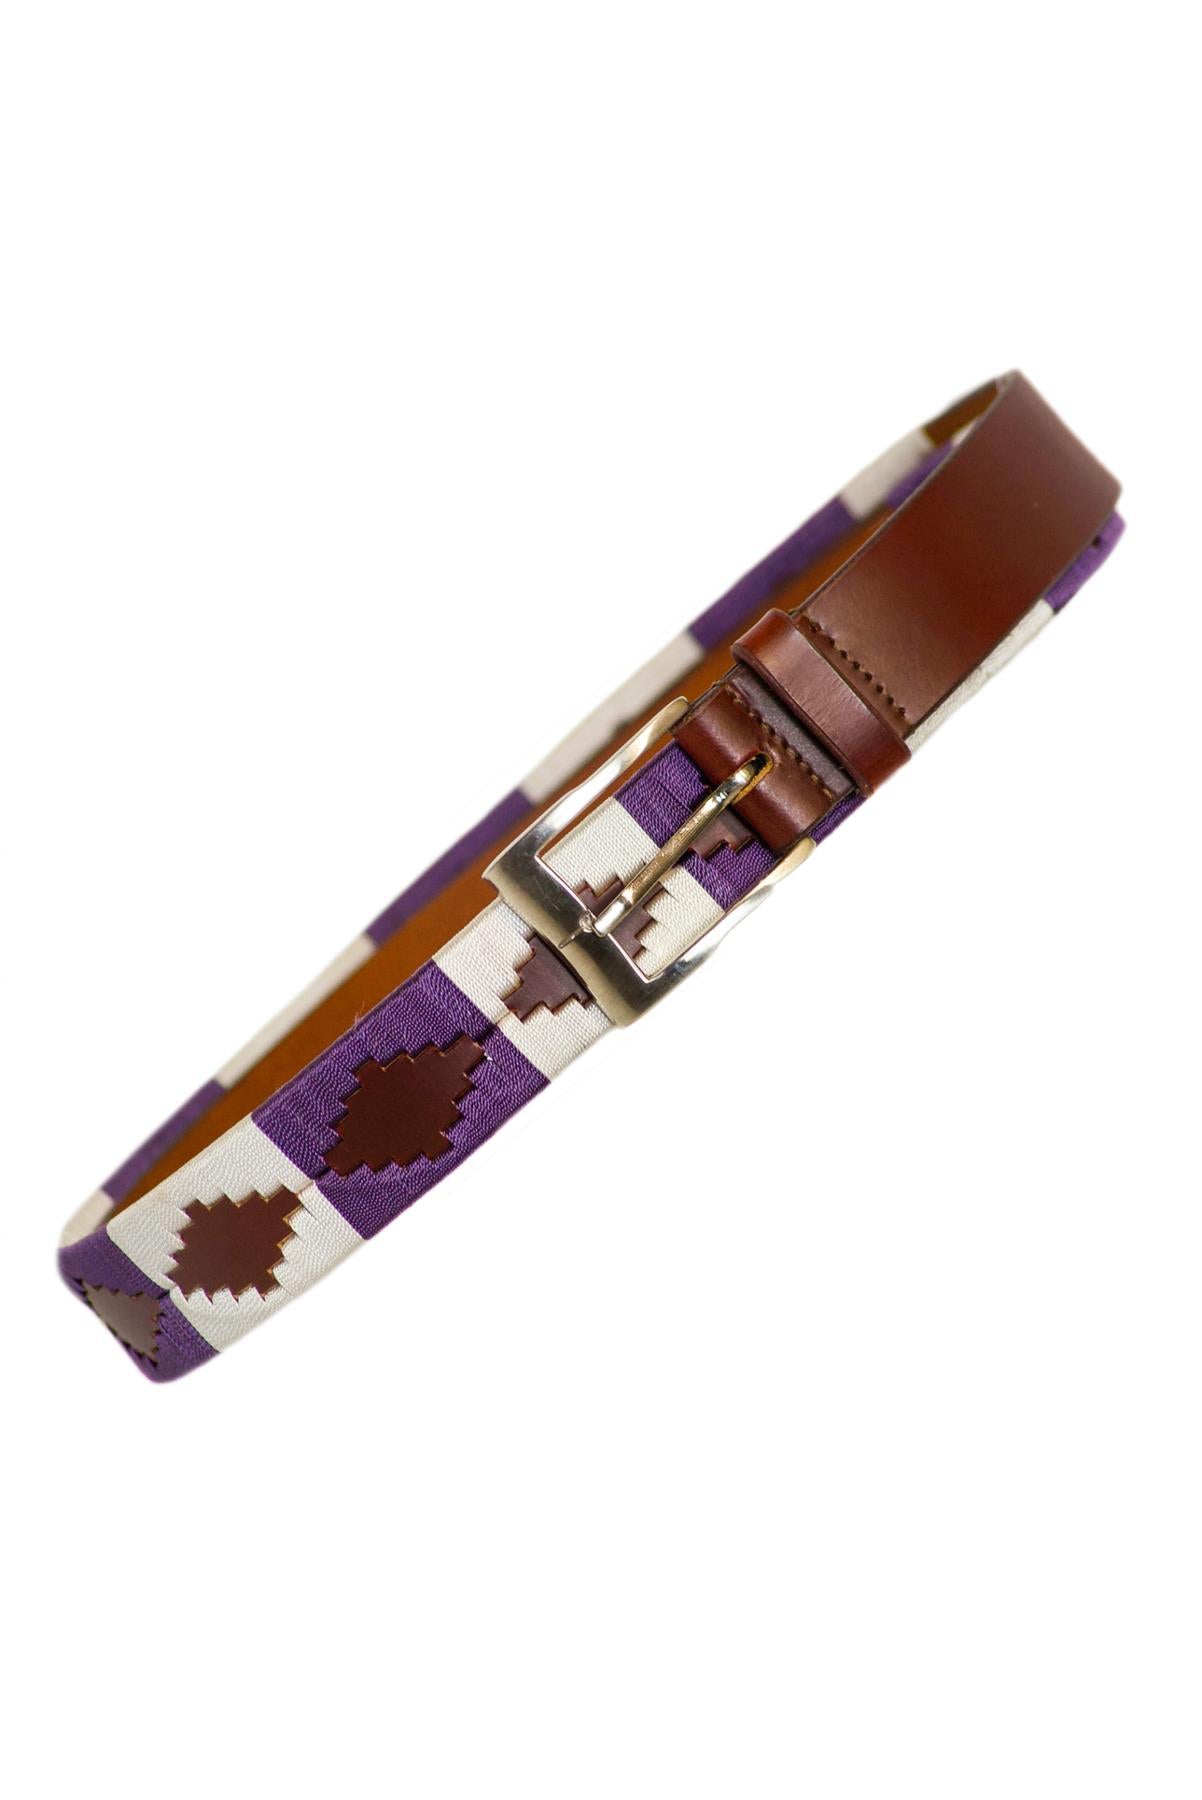 Handmade Polo Argentinian Brown Leather Belts Purple/White 28''-48''(70cm-110cm)